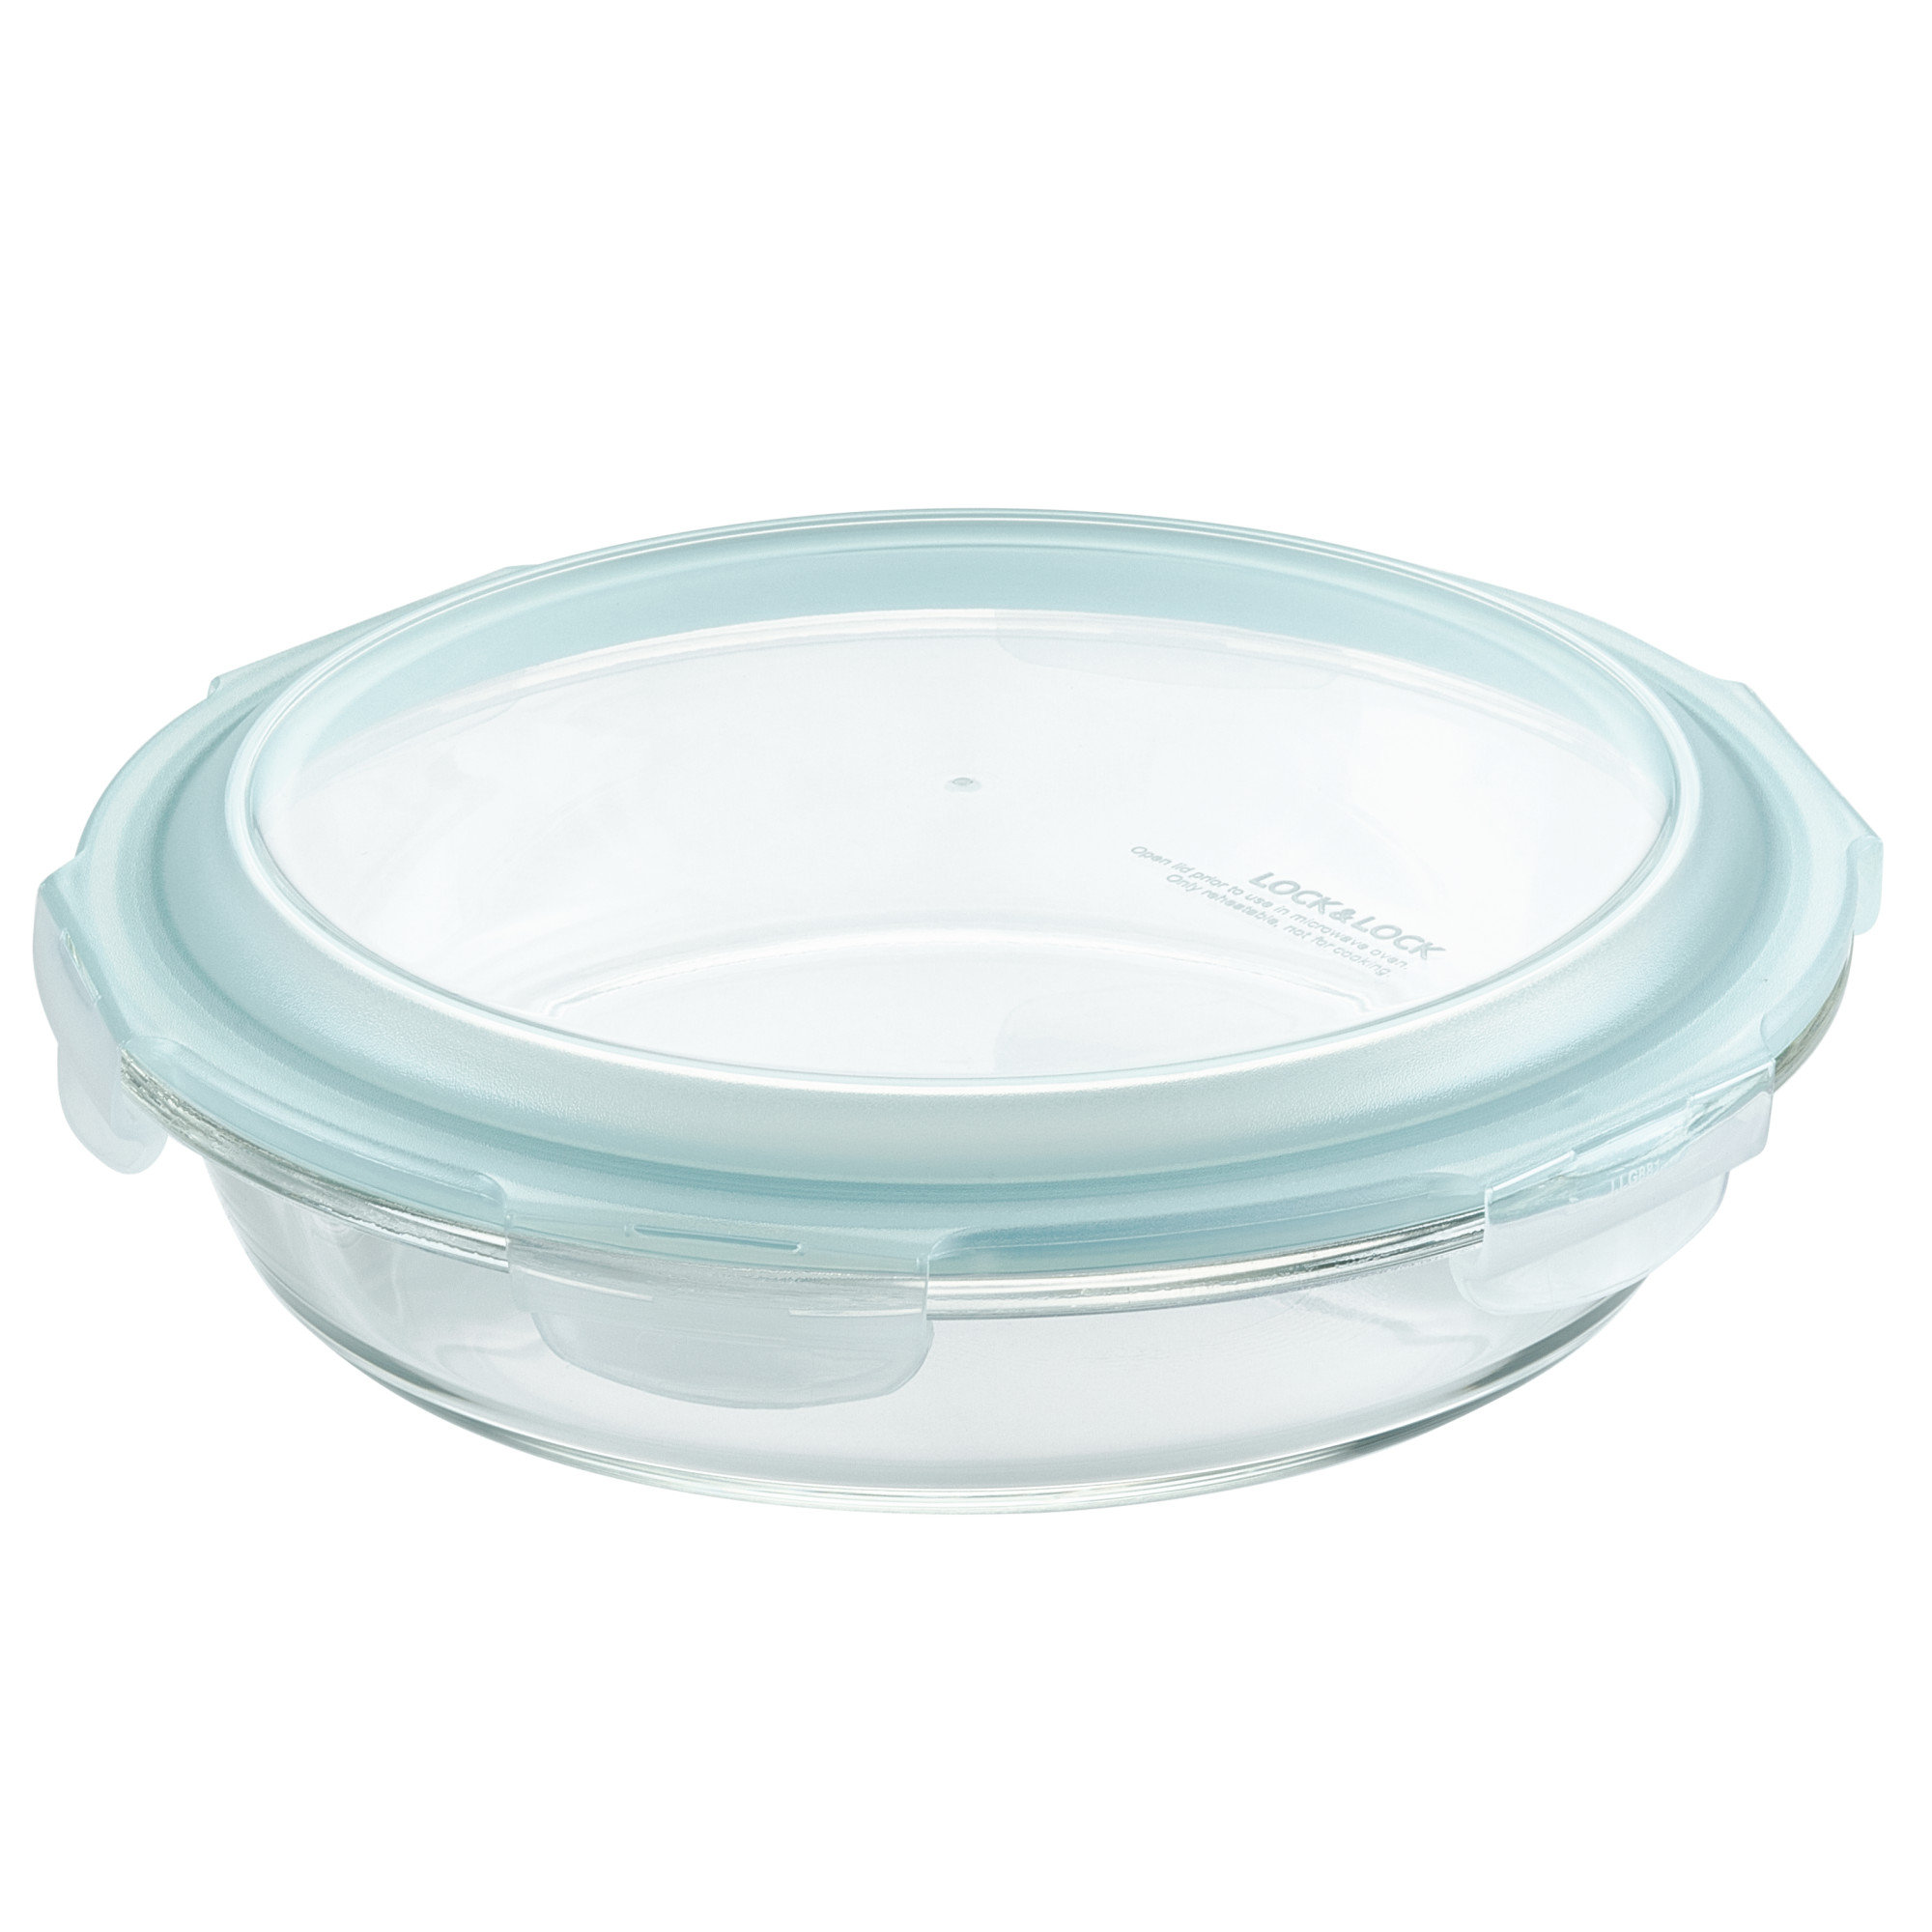  LOCK & LOCK Purely Better Glass Food Storage Container